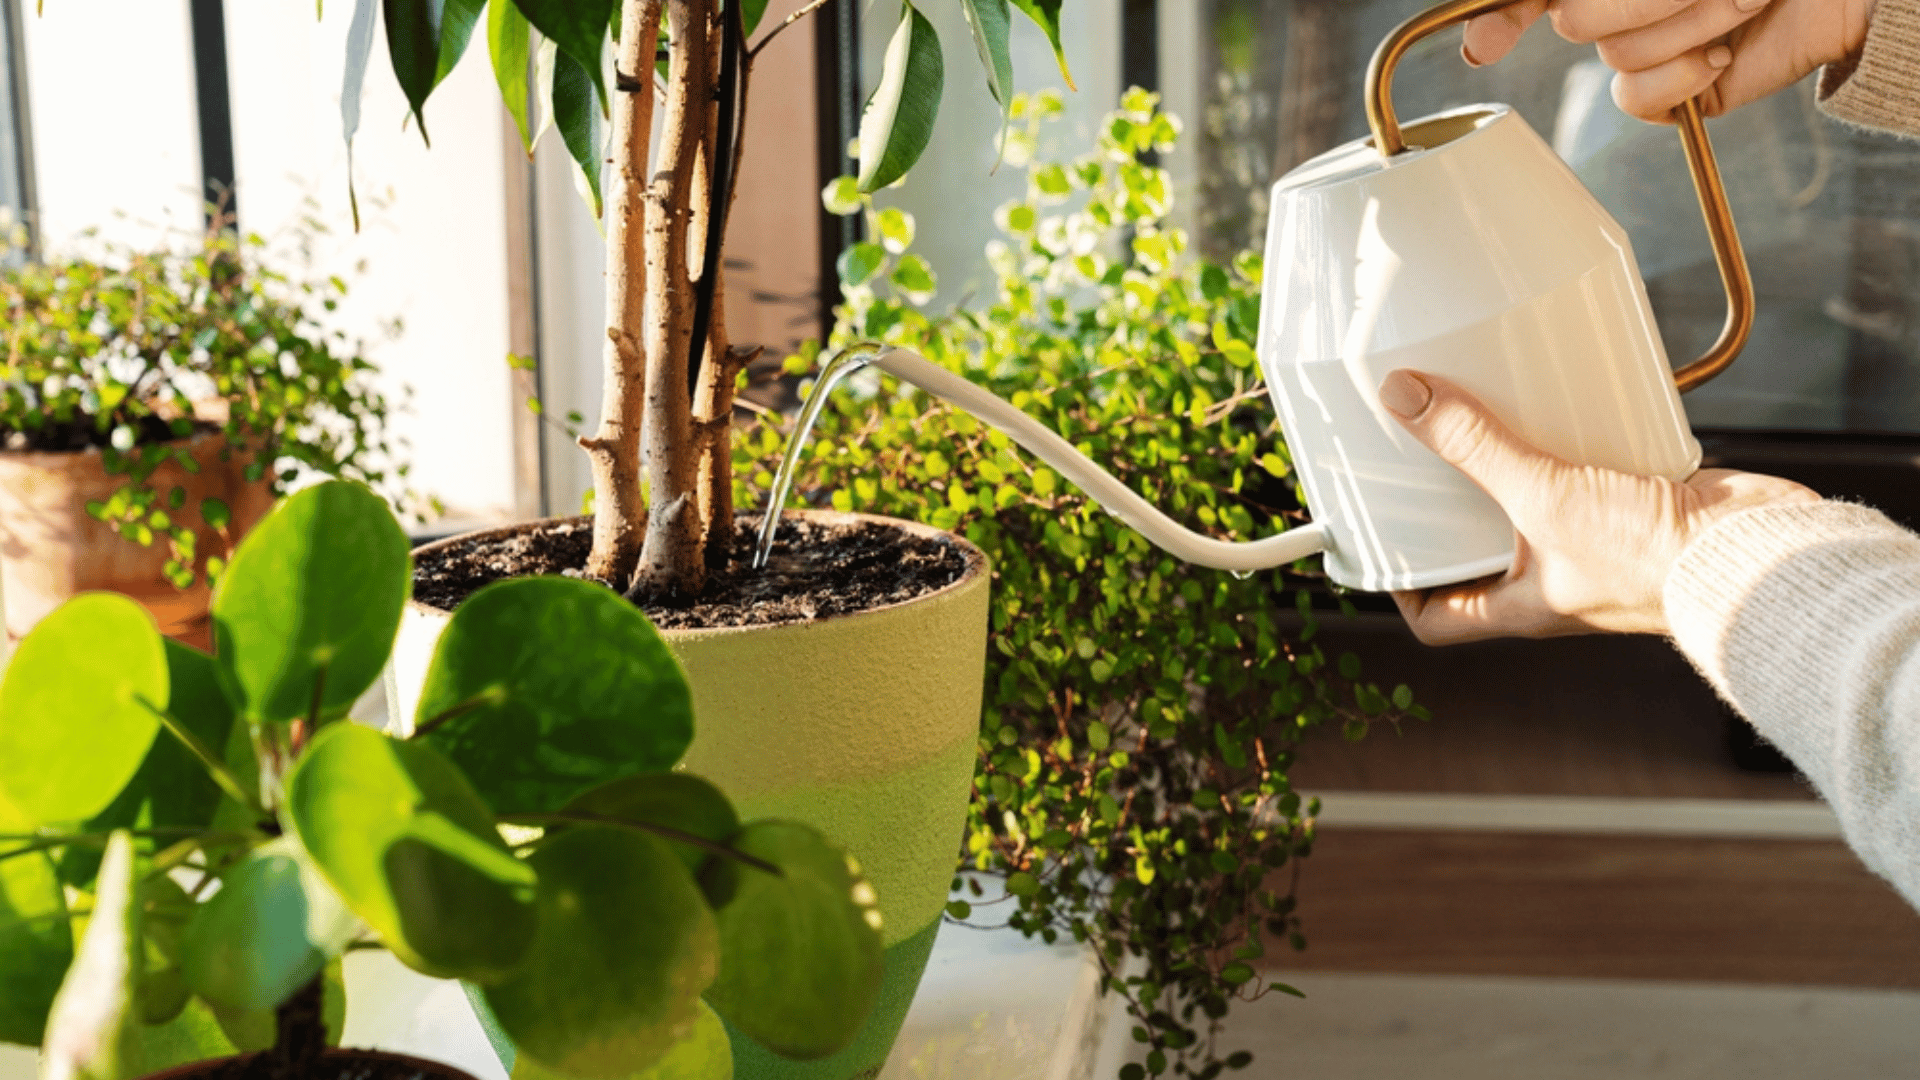 How to Protect Houseplants During a Heat Wave